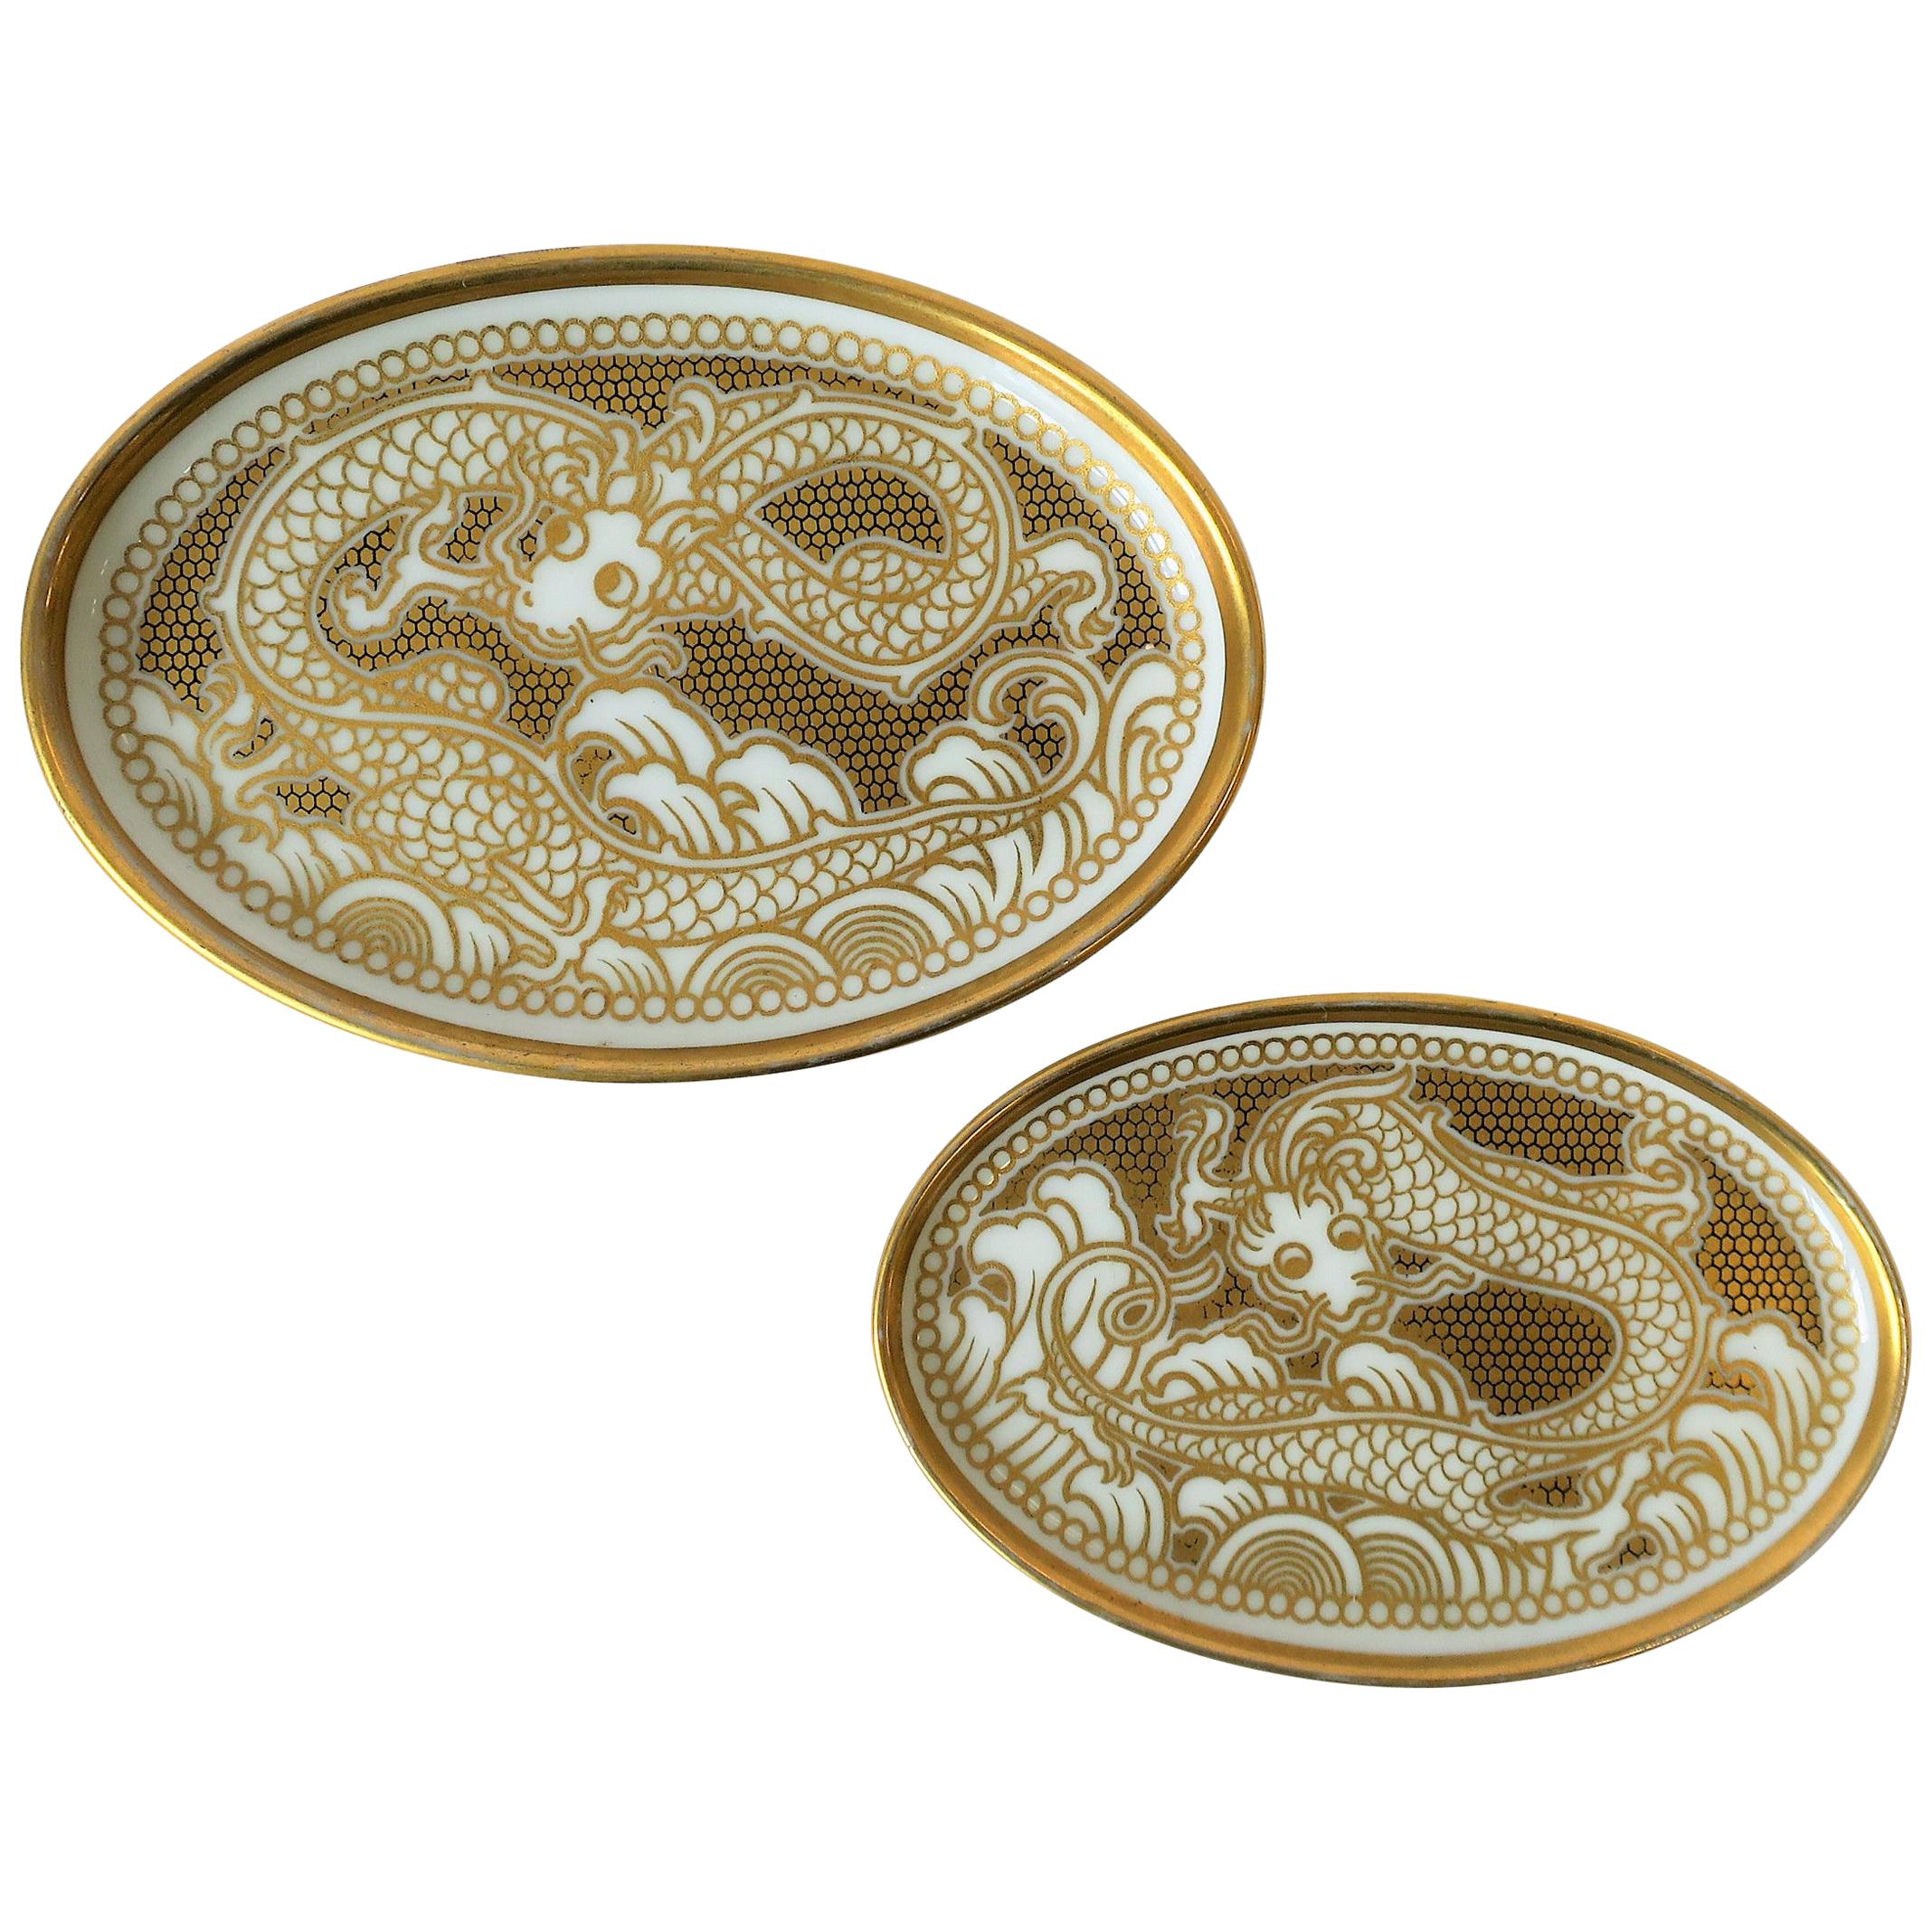 Designer Gold Dragon Jewelry Dishes by Rosenthal 